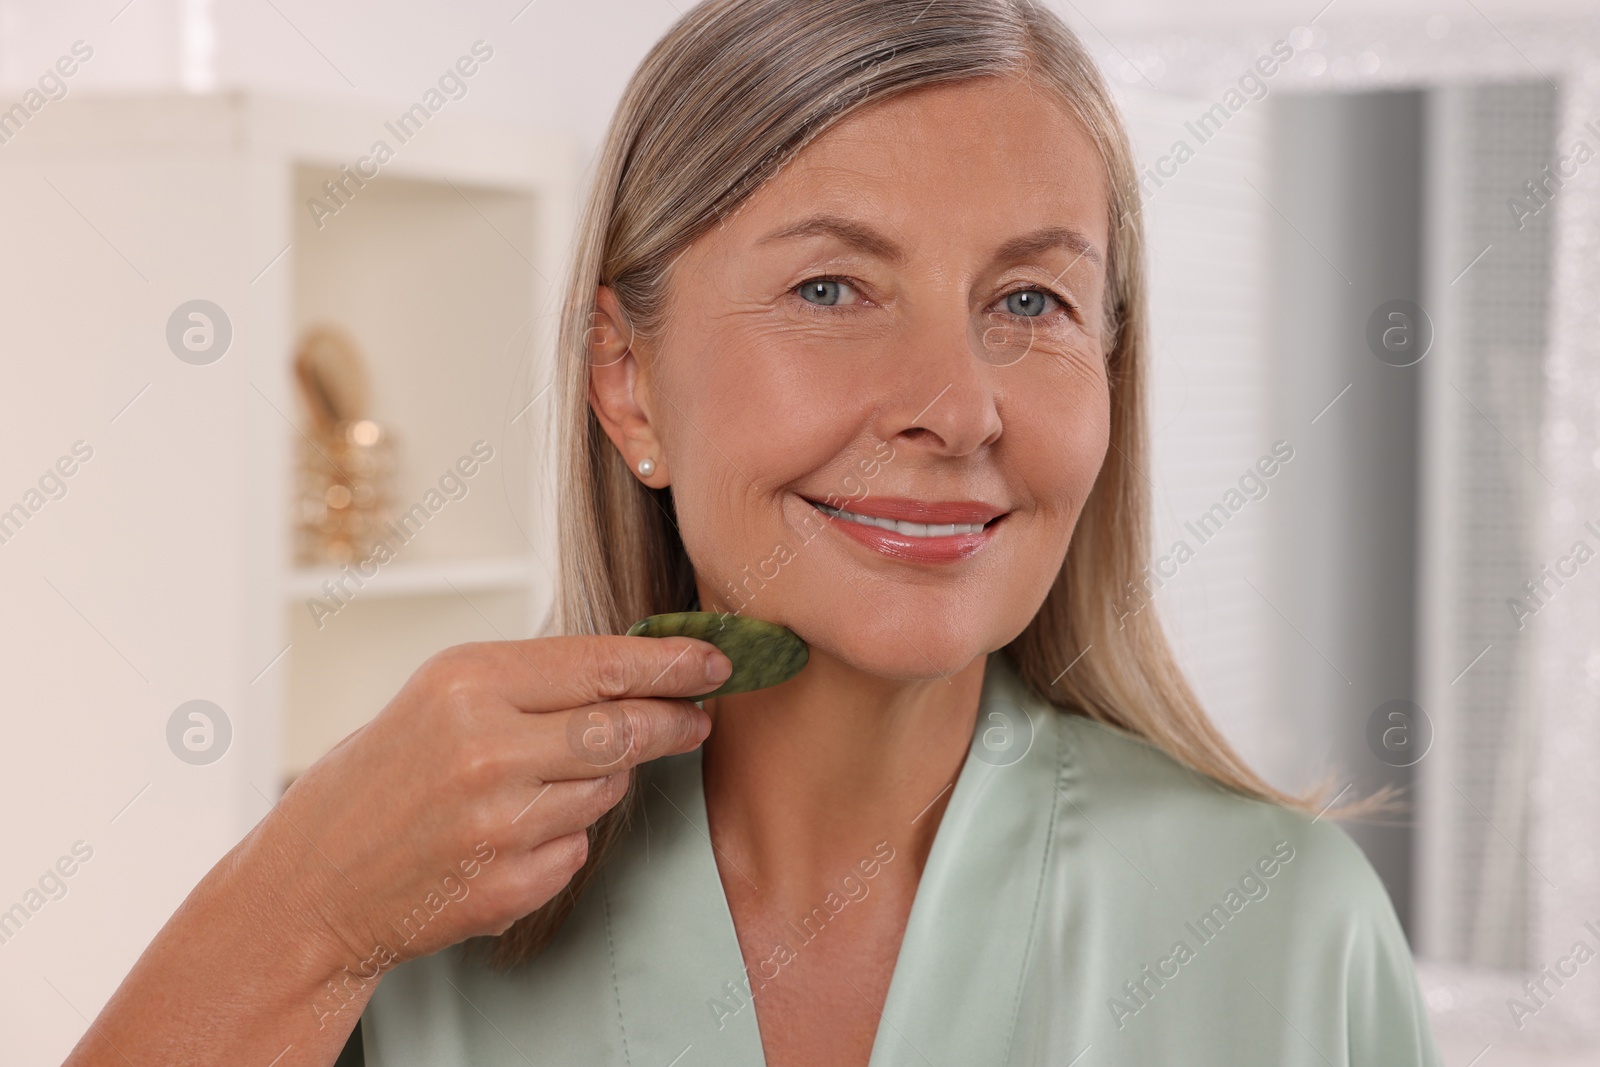 Photo of Woman massaging her face with jade gua sha tool in bathroom